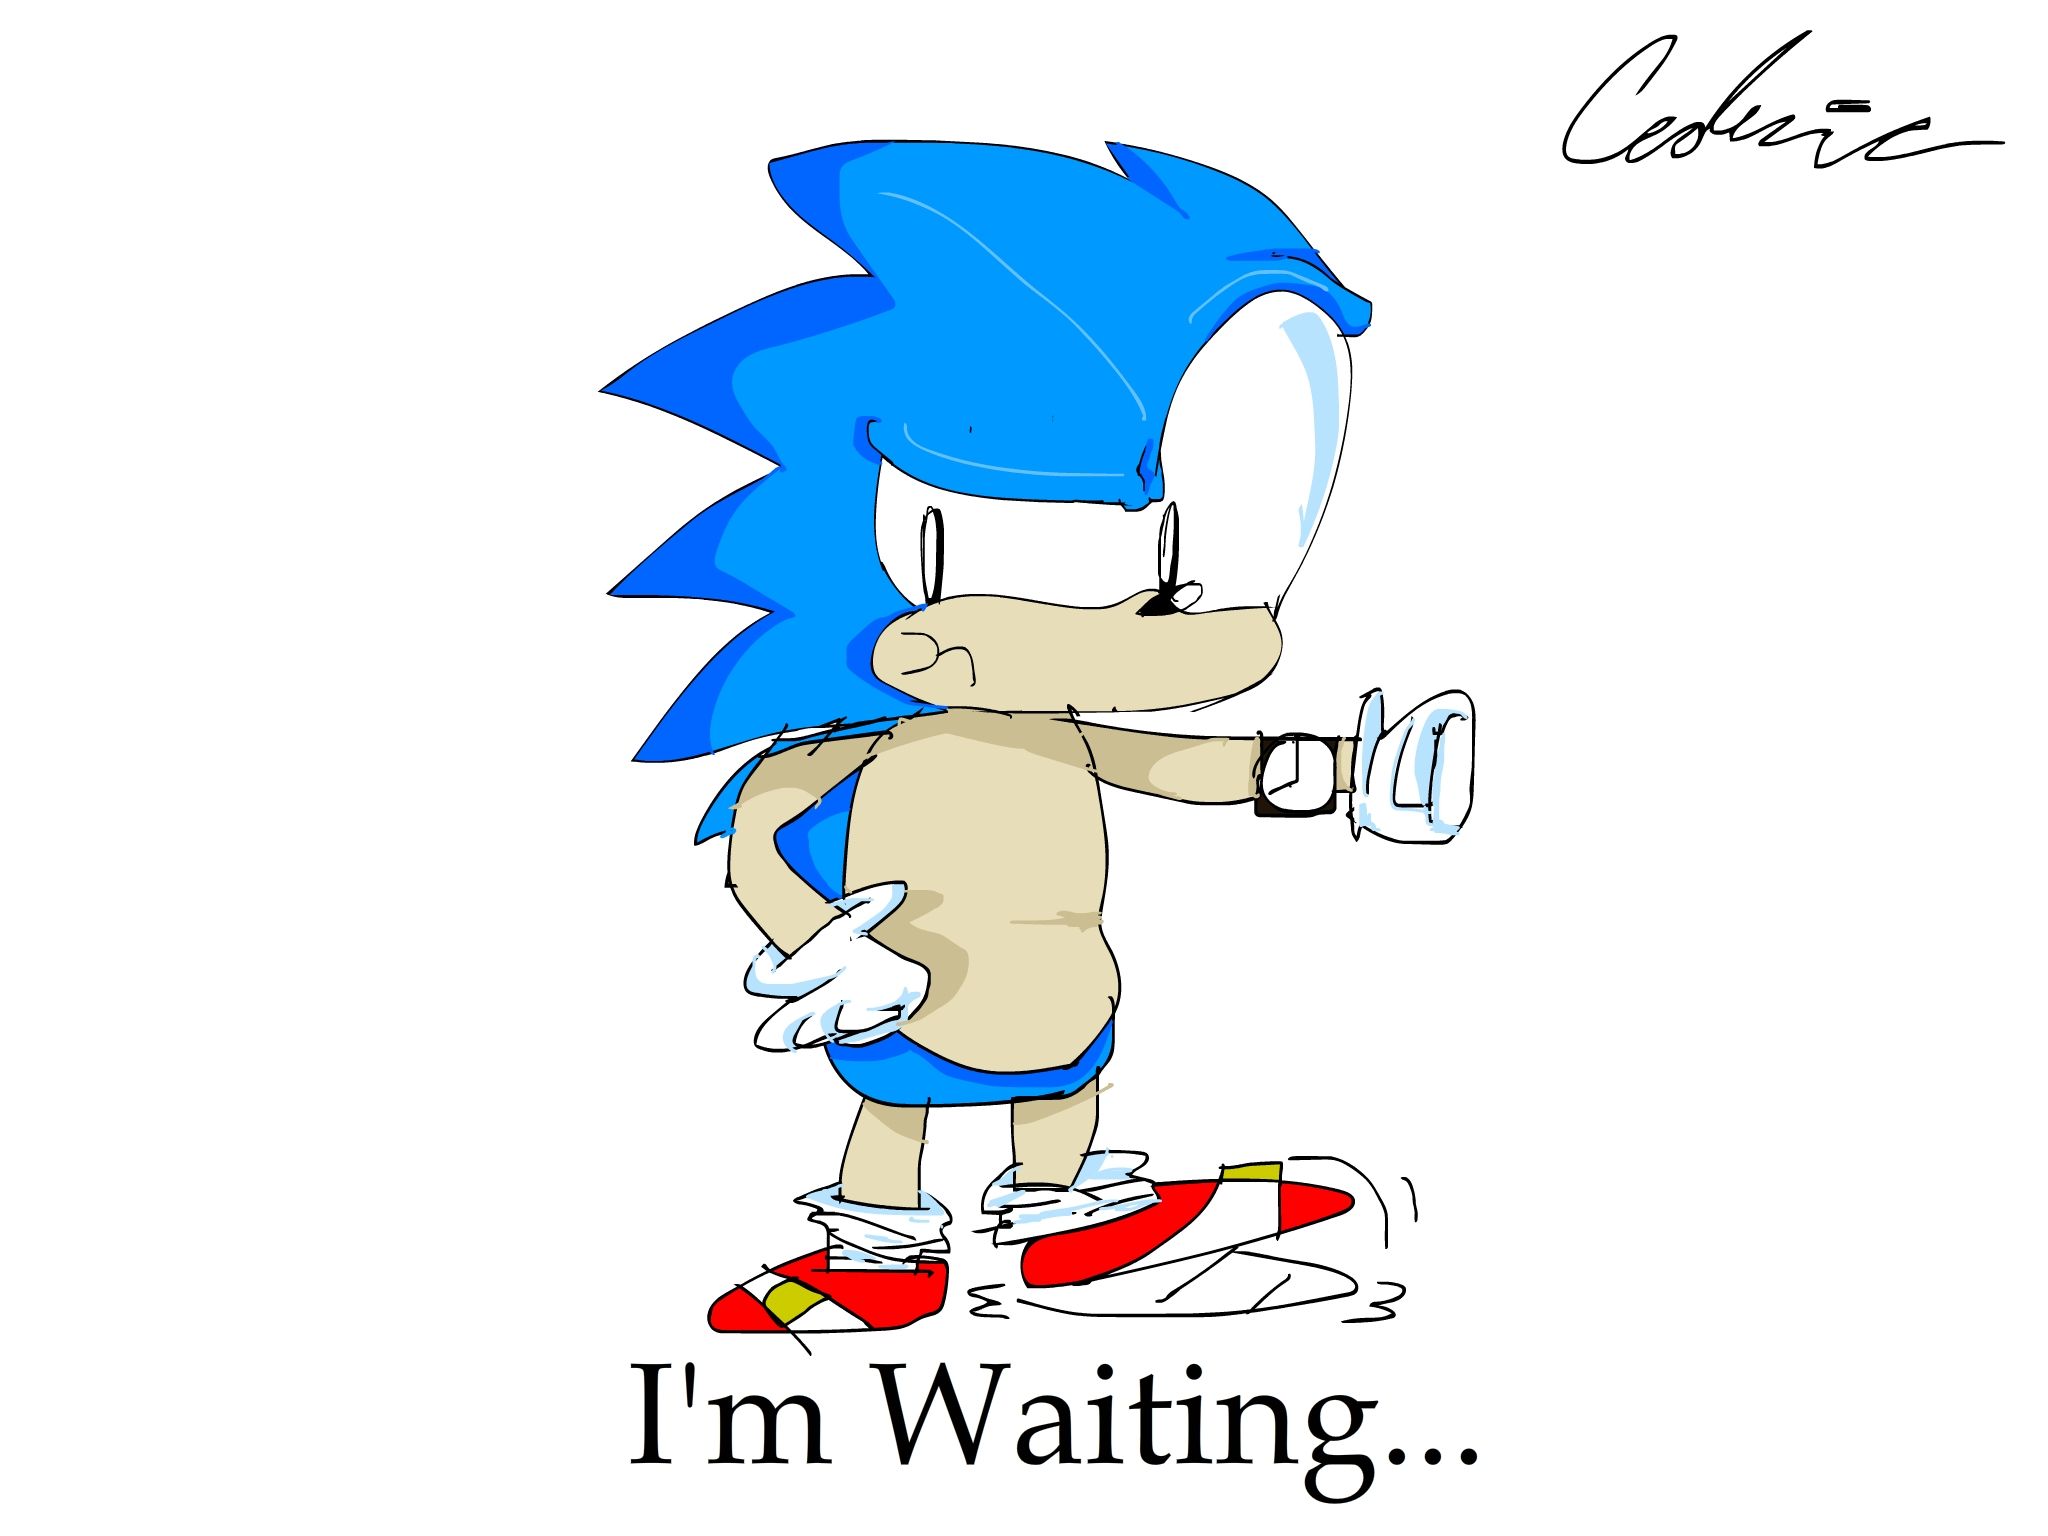 Some Sonic fanart I made by ComicalCoAnimations on Newgrounds